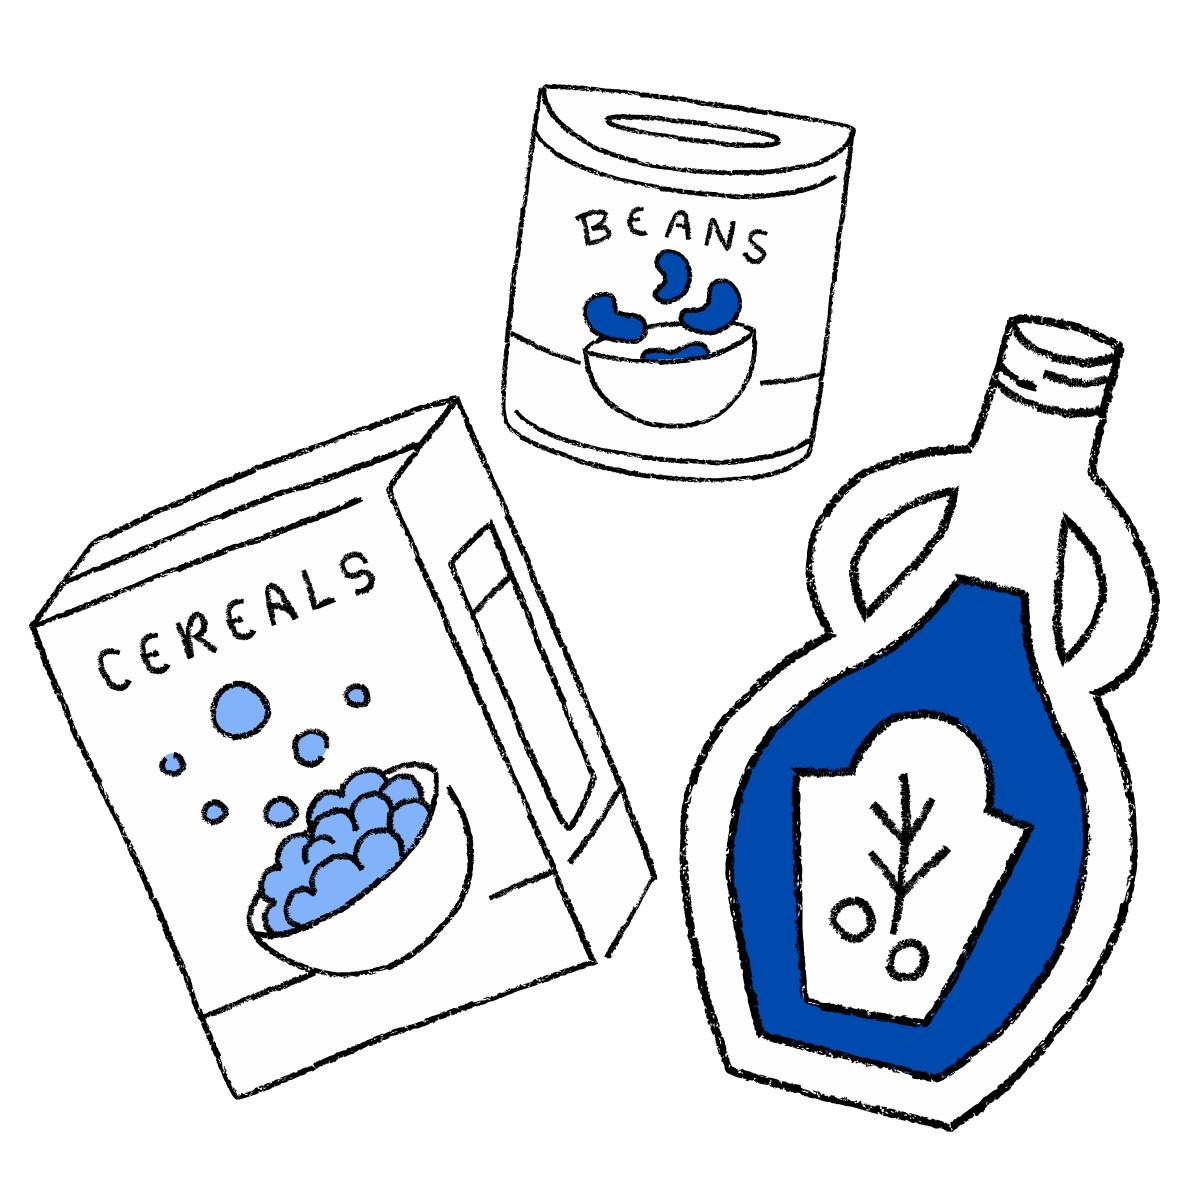 Illustration of cereal, oil, and a can of beans